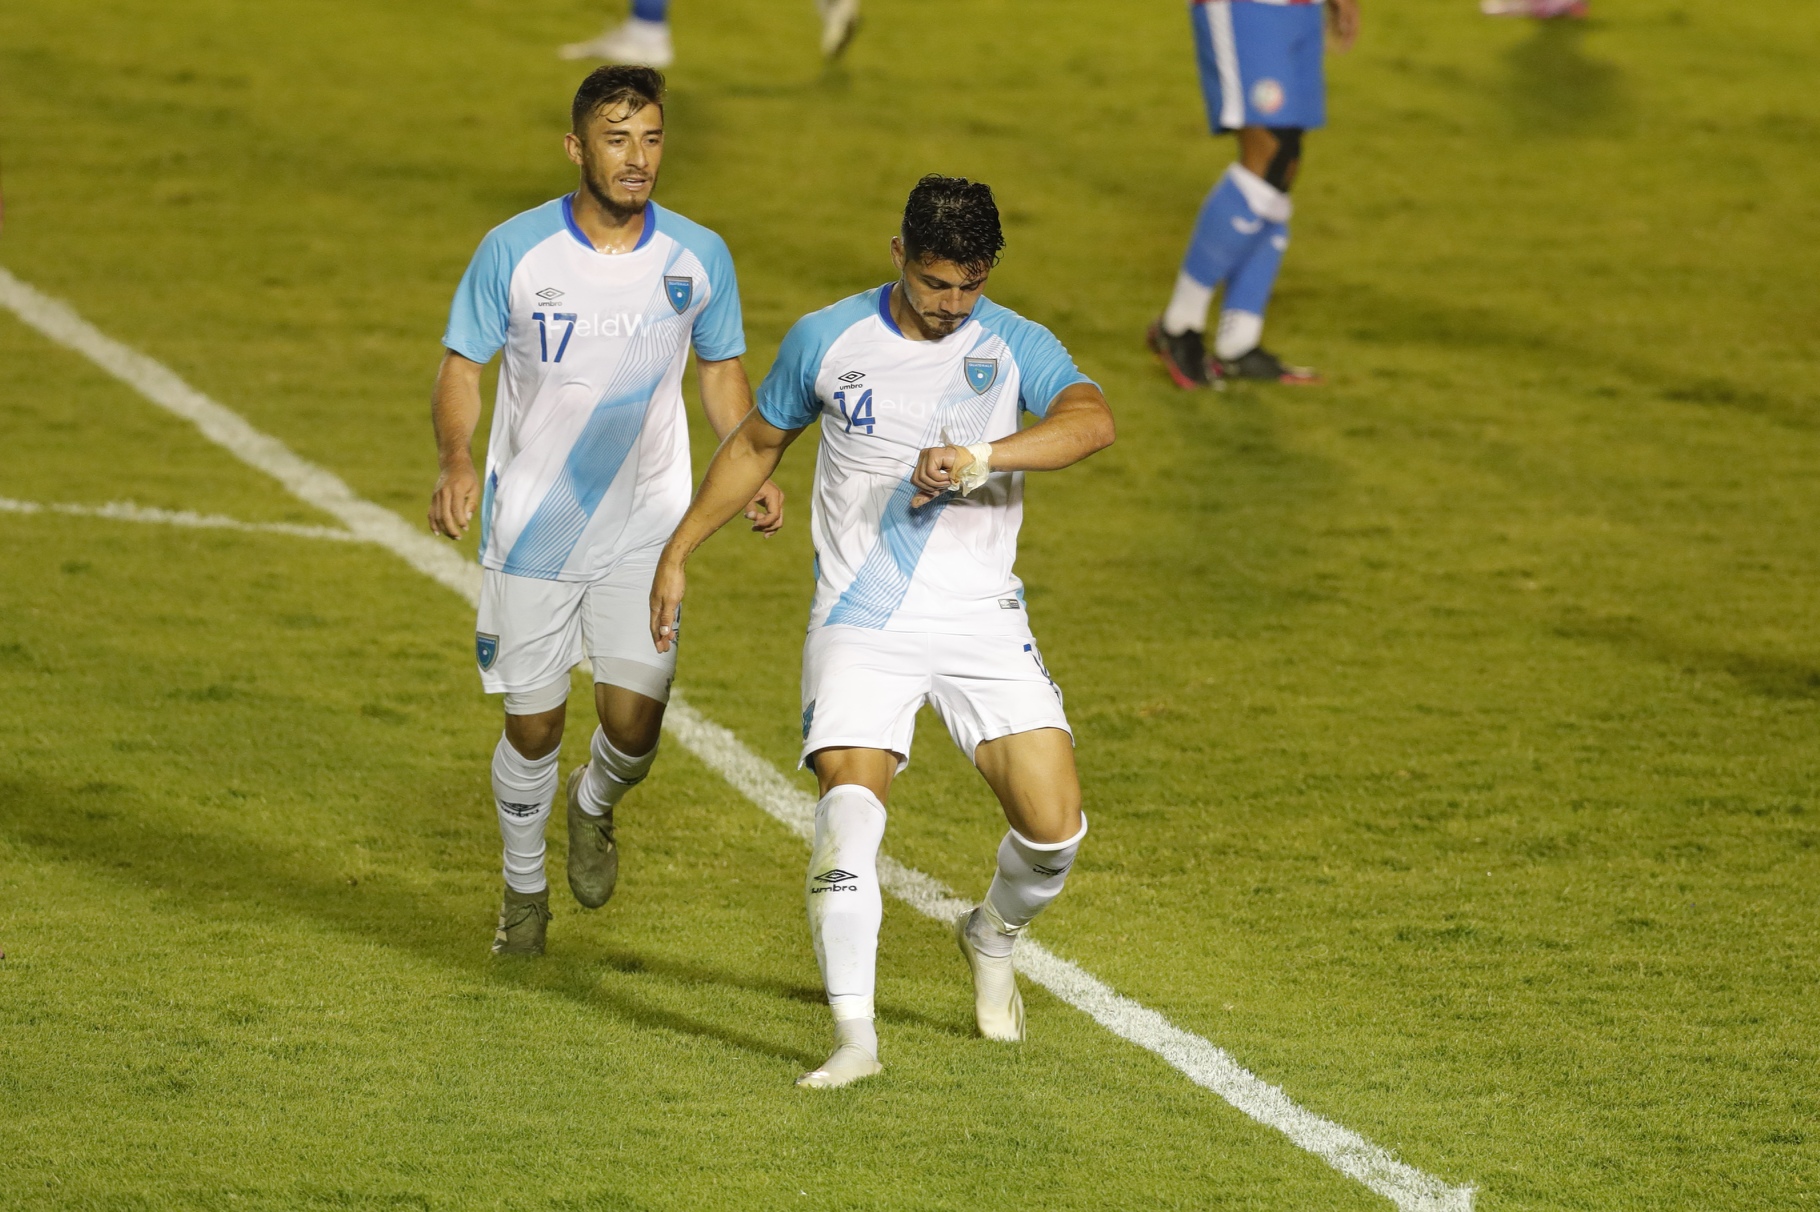 Guatemala came to Puerto Rico with a goal by Darwin Lom in a match in which Bicolor showed great interest and fell, according to Amarini Villatoro